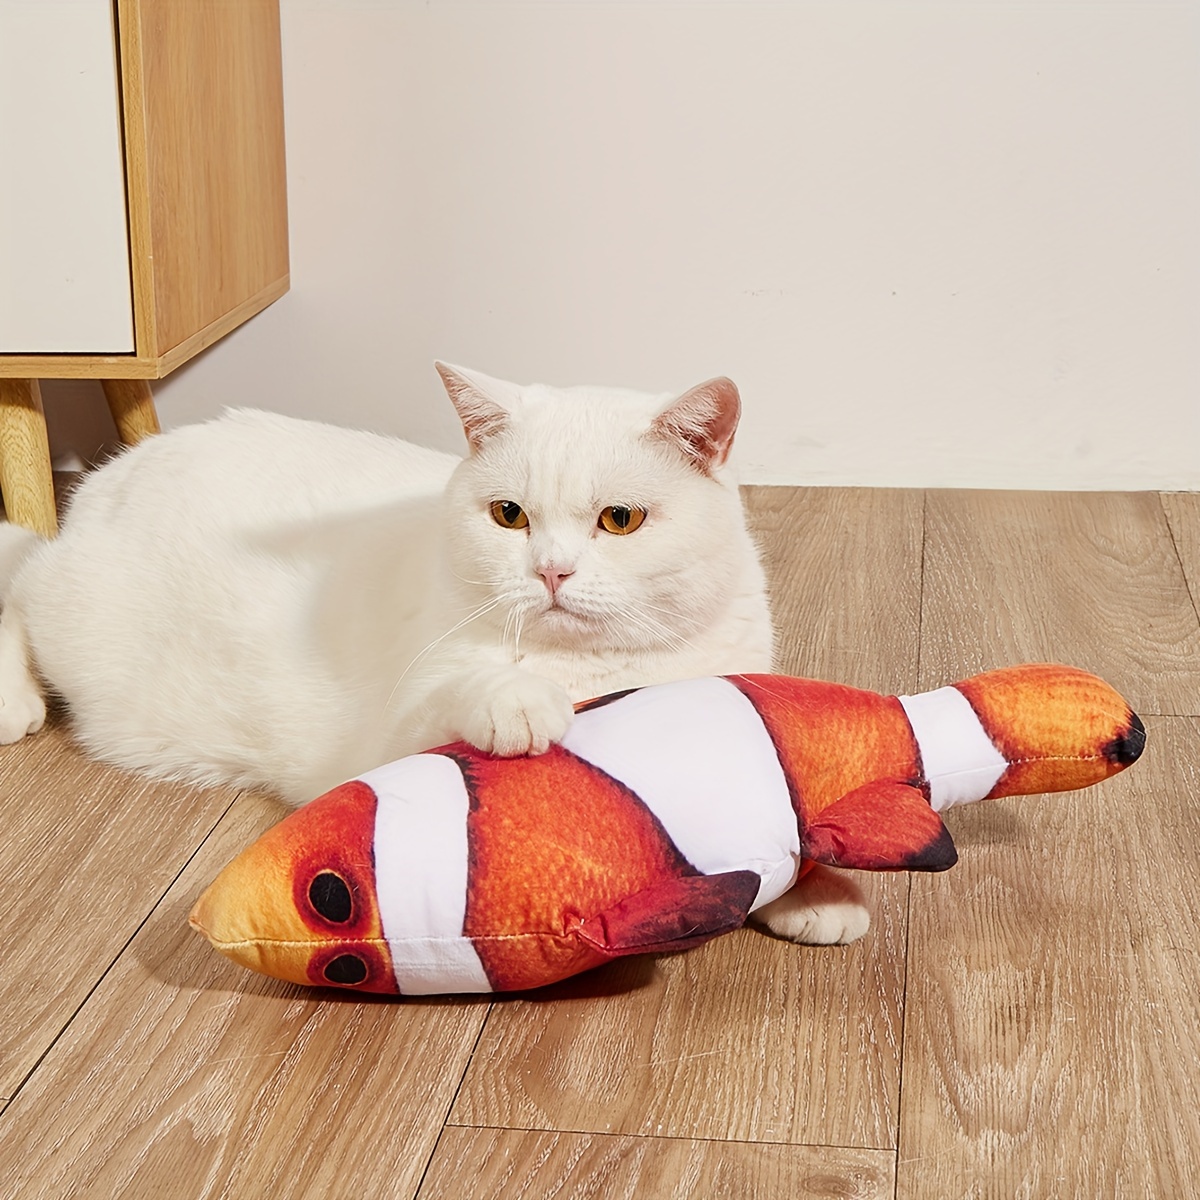 A+a Pets' Cat Wand Nemo Teaser Interactive Toy with retractable